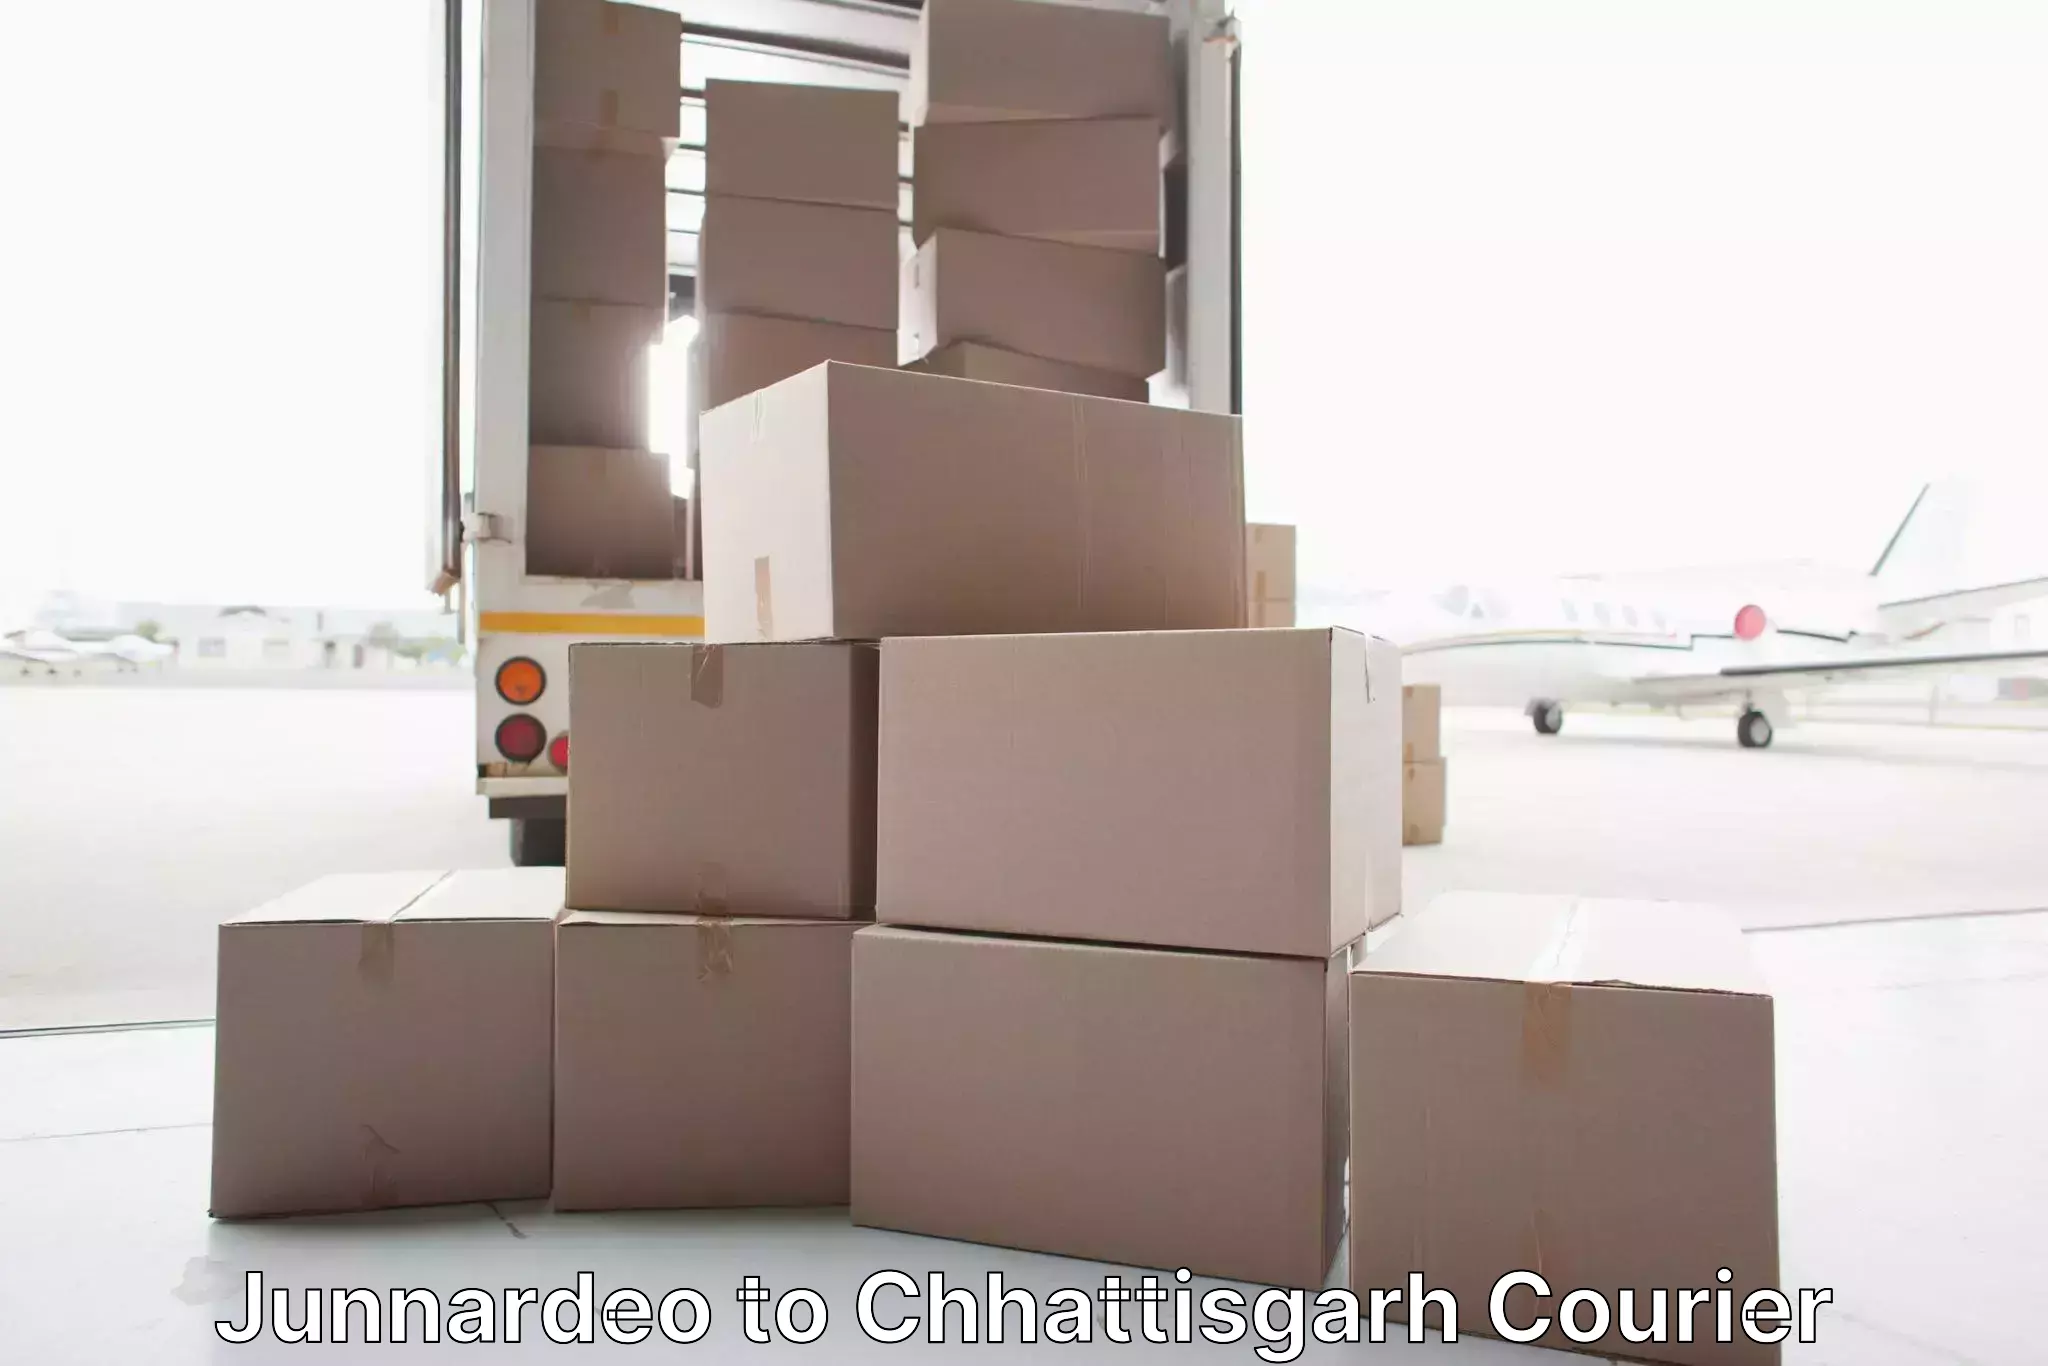 Quality relocation services Junnardeo to Ratanpur